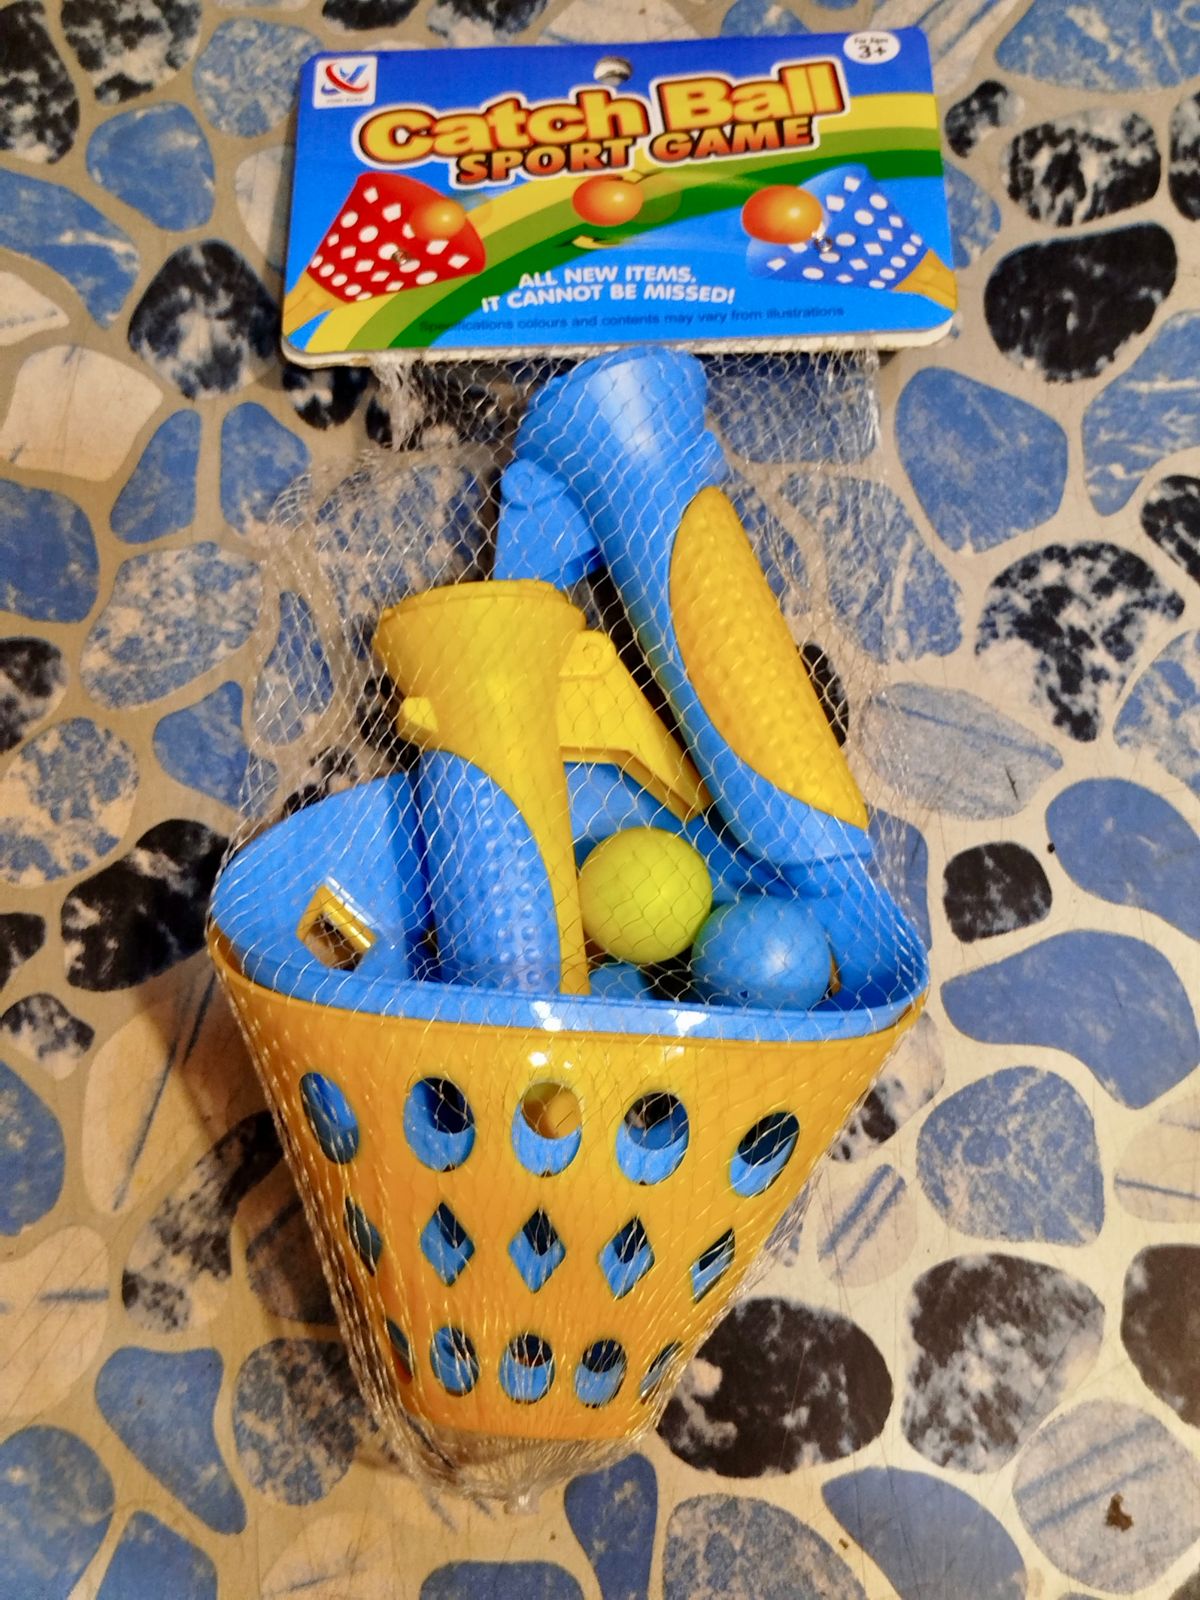 Click And Catch Ball Shoot Game For Kids (random Color)